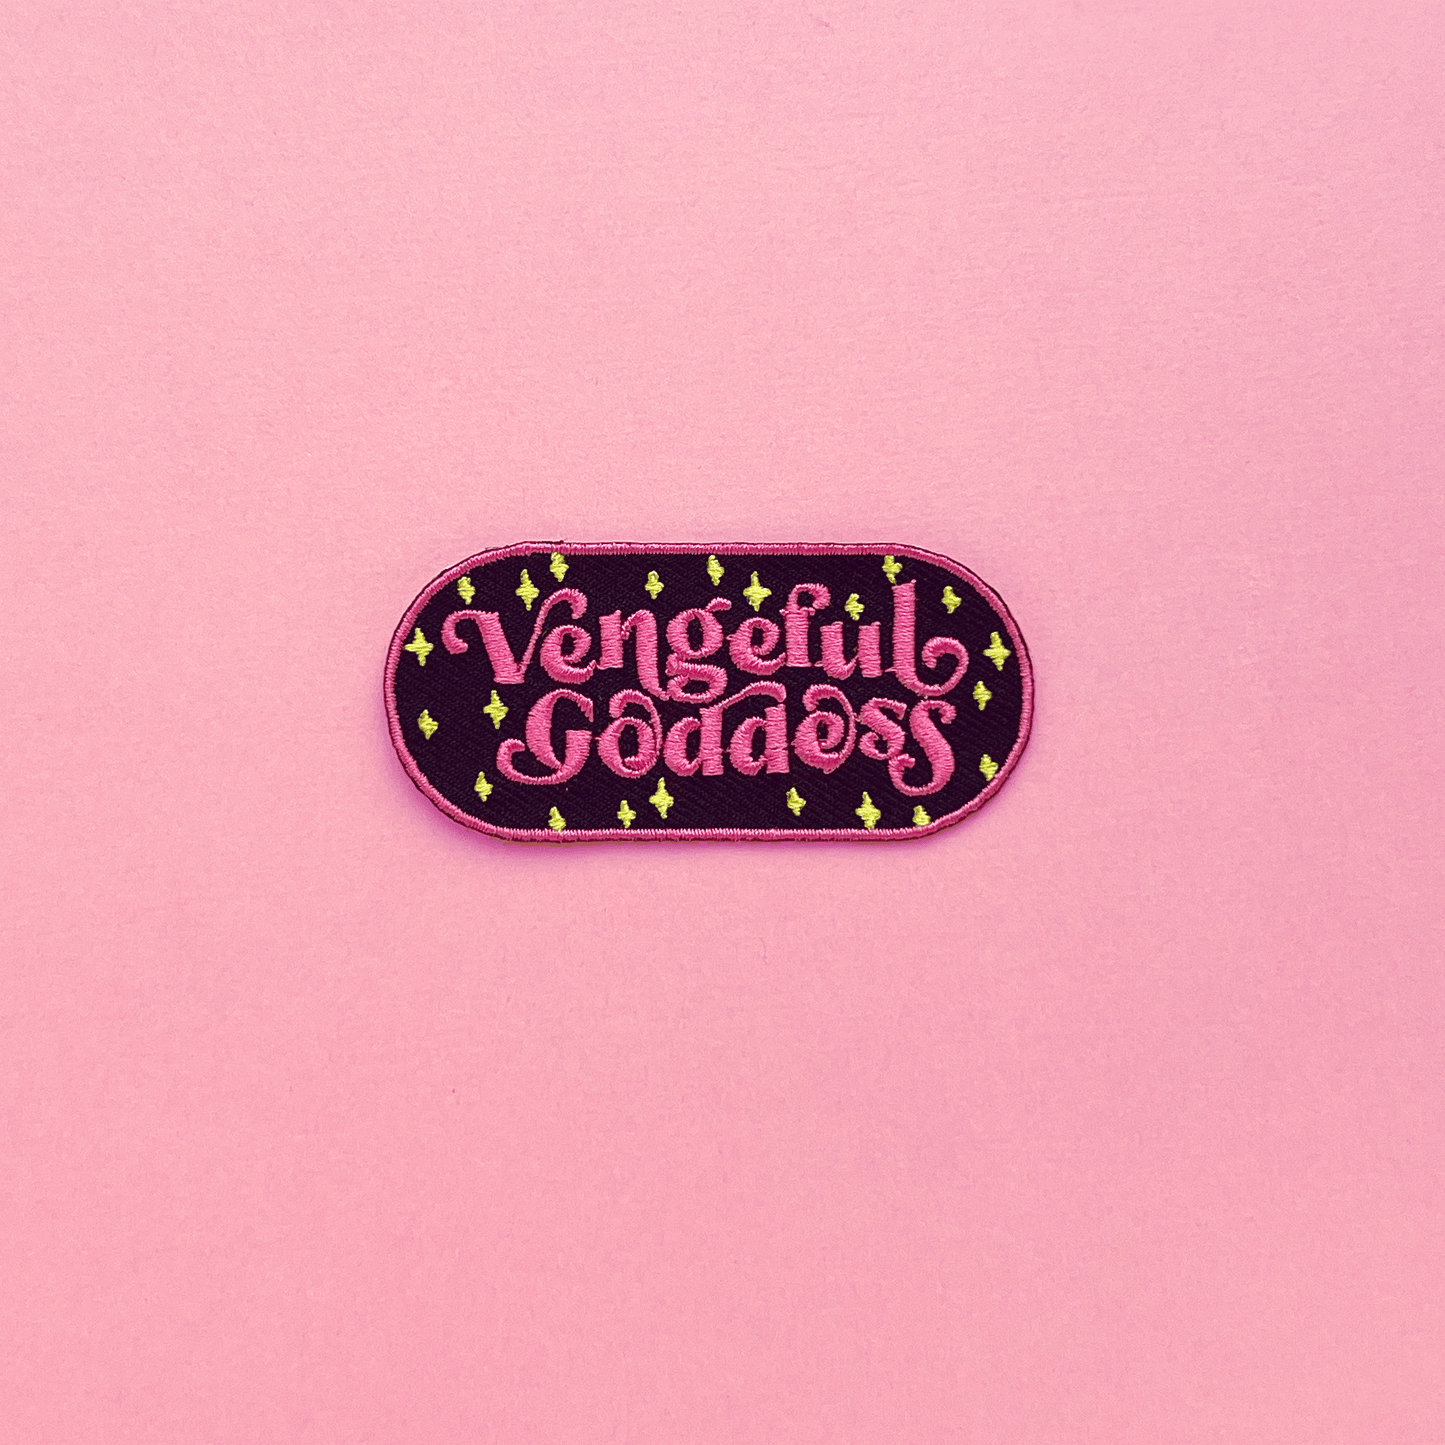 Vengeful Goddess - Feminist Funny Empower Embroidered Patch